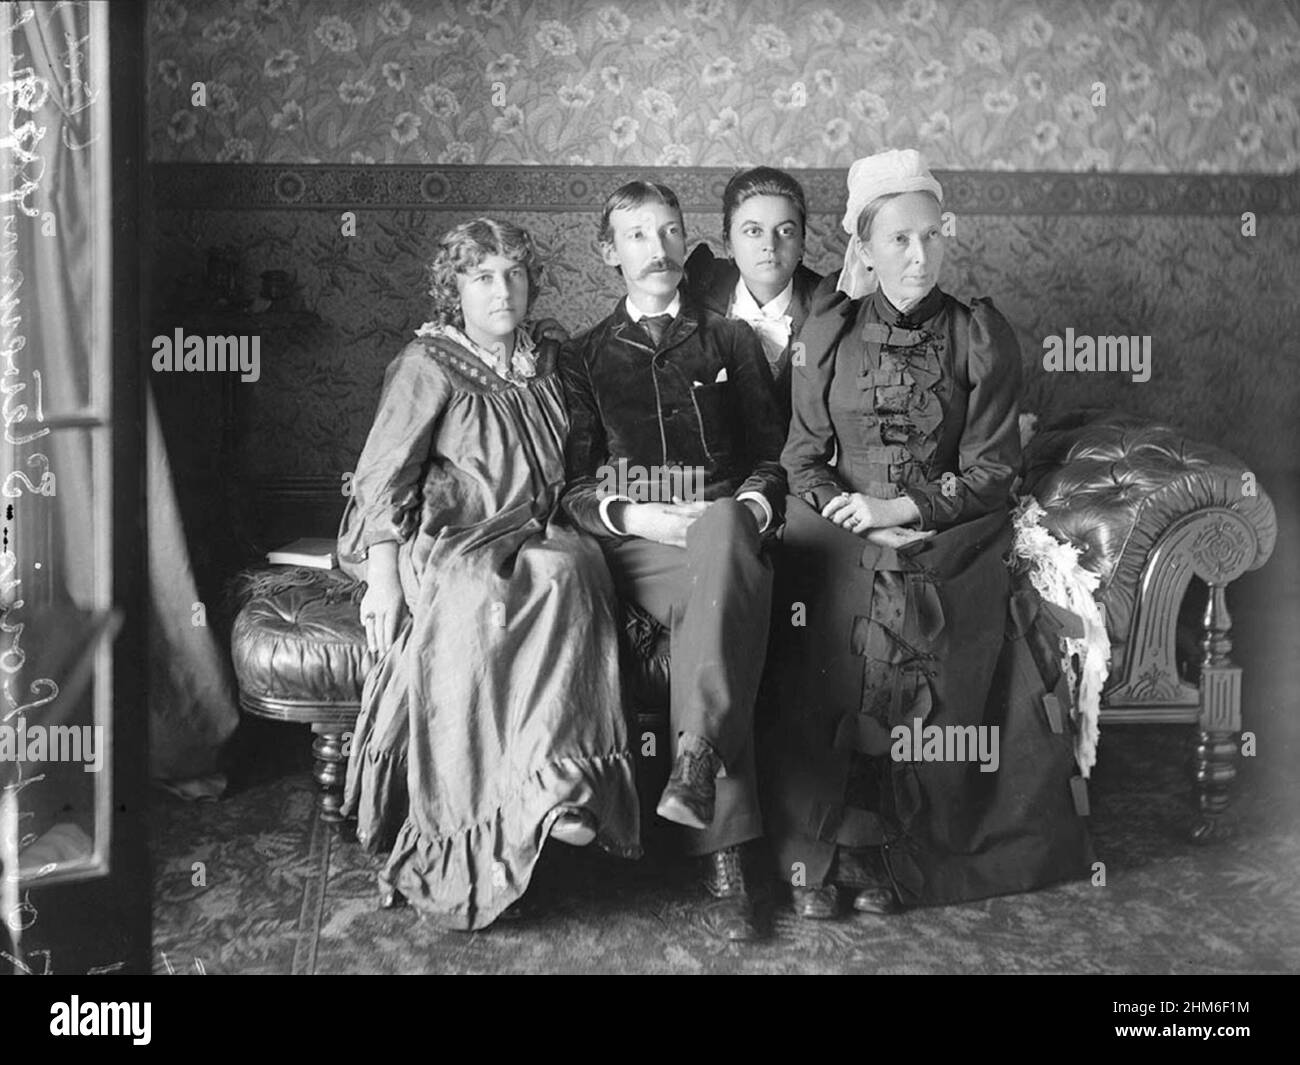 A portrait of the Scottish writer Robert Louis Stevenson, author of Treasure Island and The Black Arrow,  with his family in 1893. He is with his wife Fanny, Stevenson, his stepdaughter Isobel, and his mother Margaret Balfour. Stock Photo